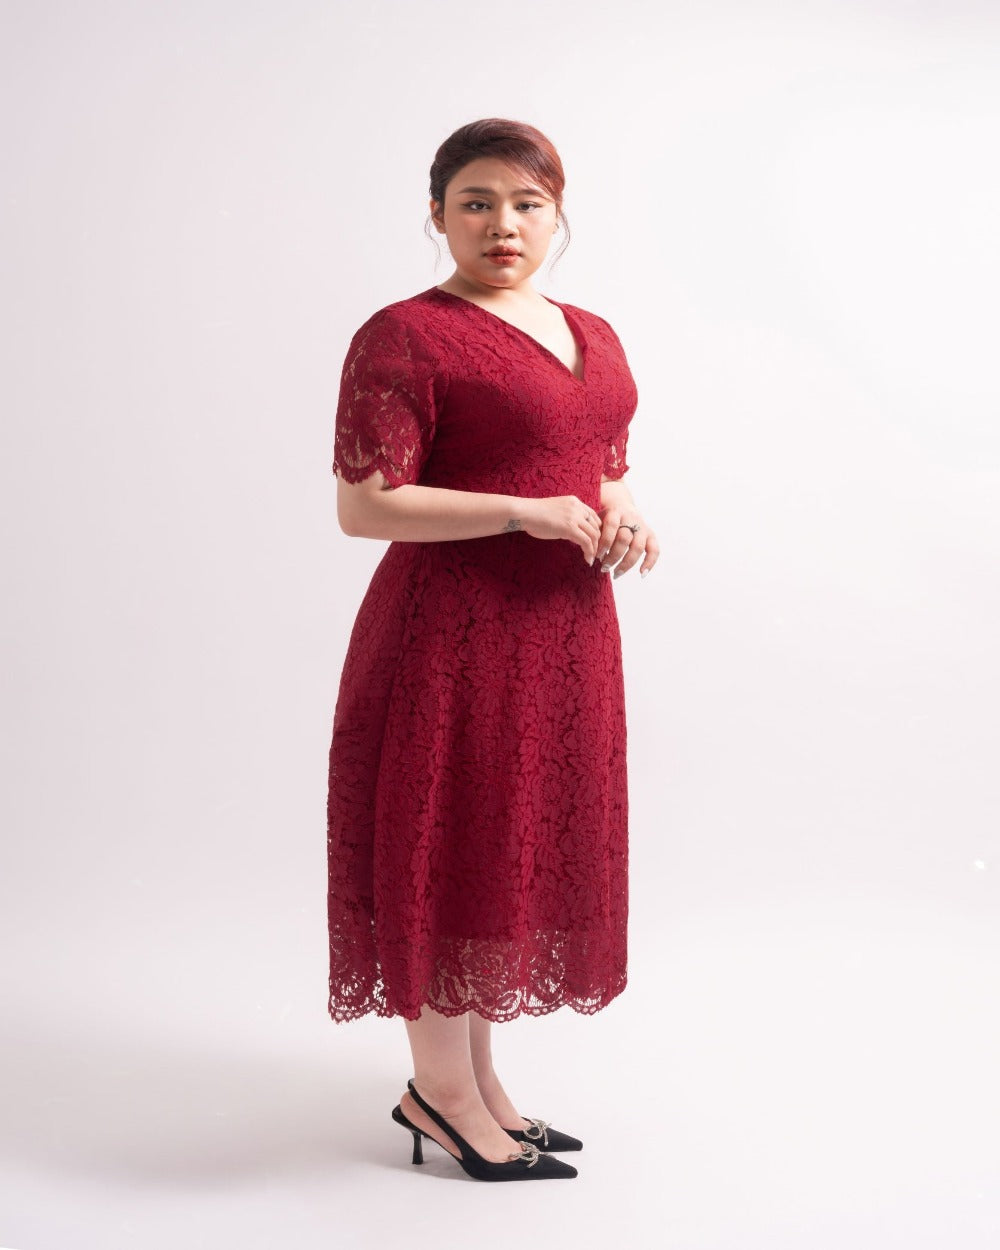 Women’s dresses with short sleeves and pockets, maroon red lace dress, Perth, Au